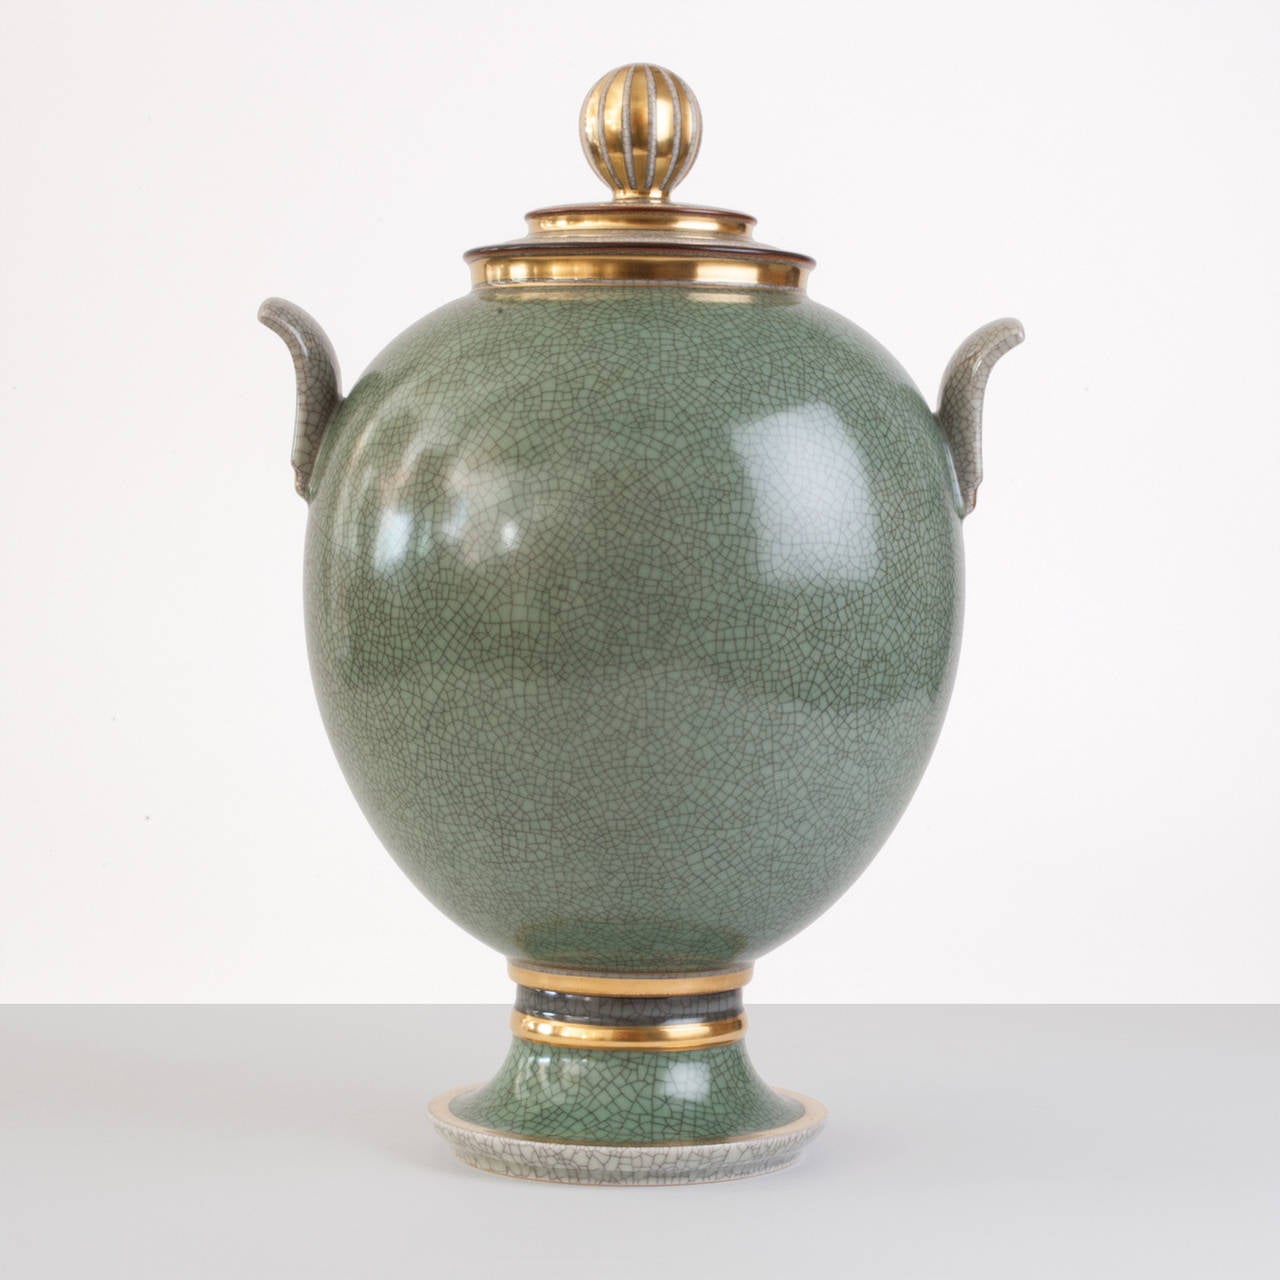 Very large Danish Art Deco Royal Copenhagen gilt & craquelure ceramic jar with lid, in a green glaze detailed with gold. Height: 16